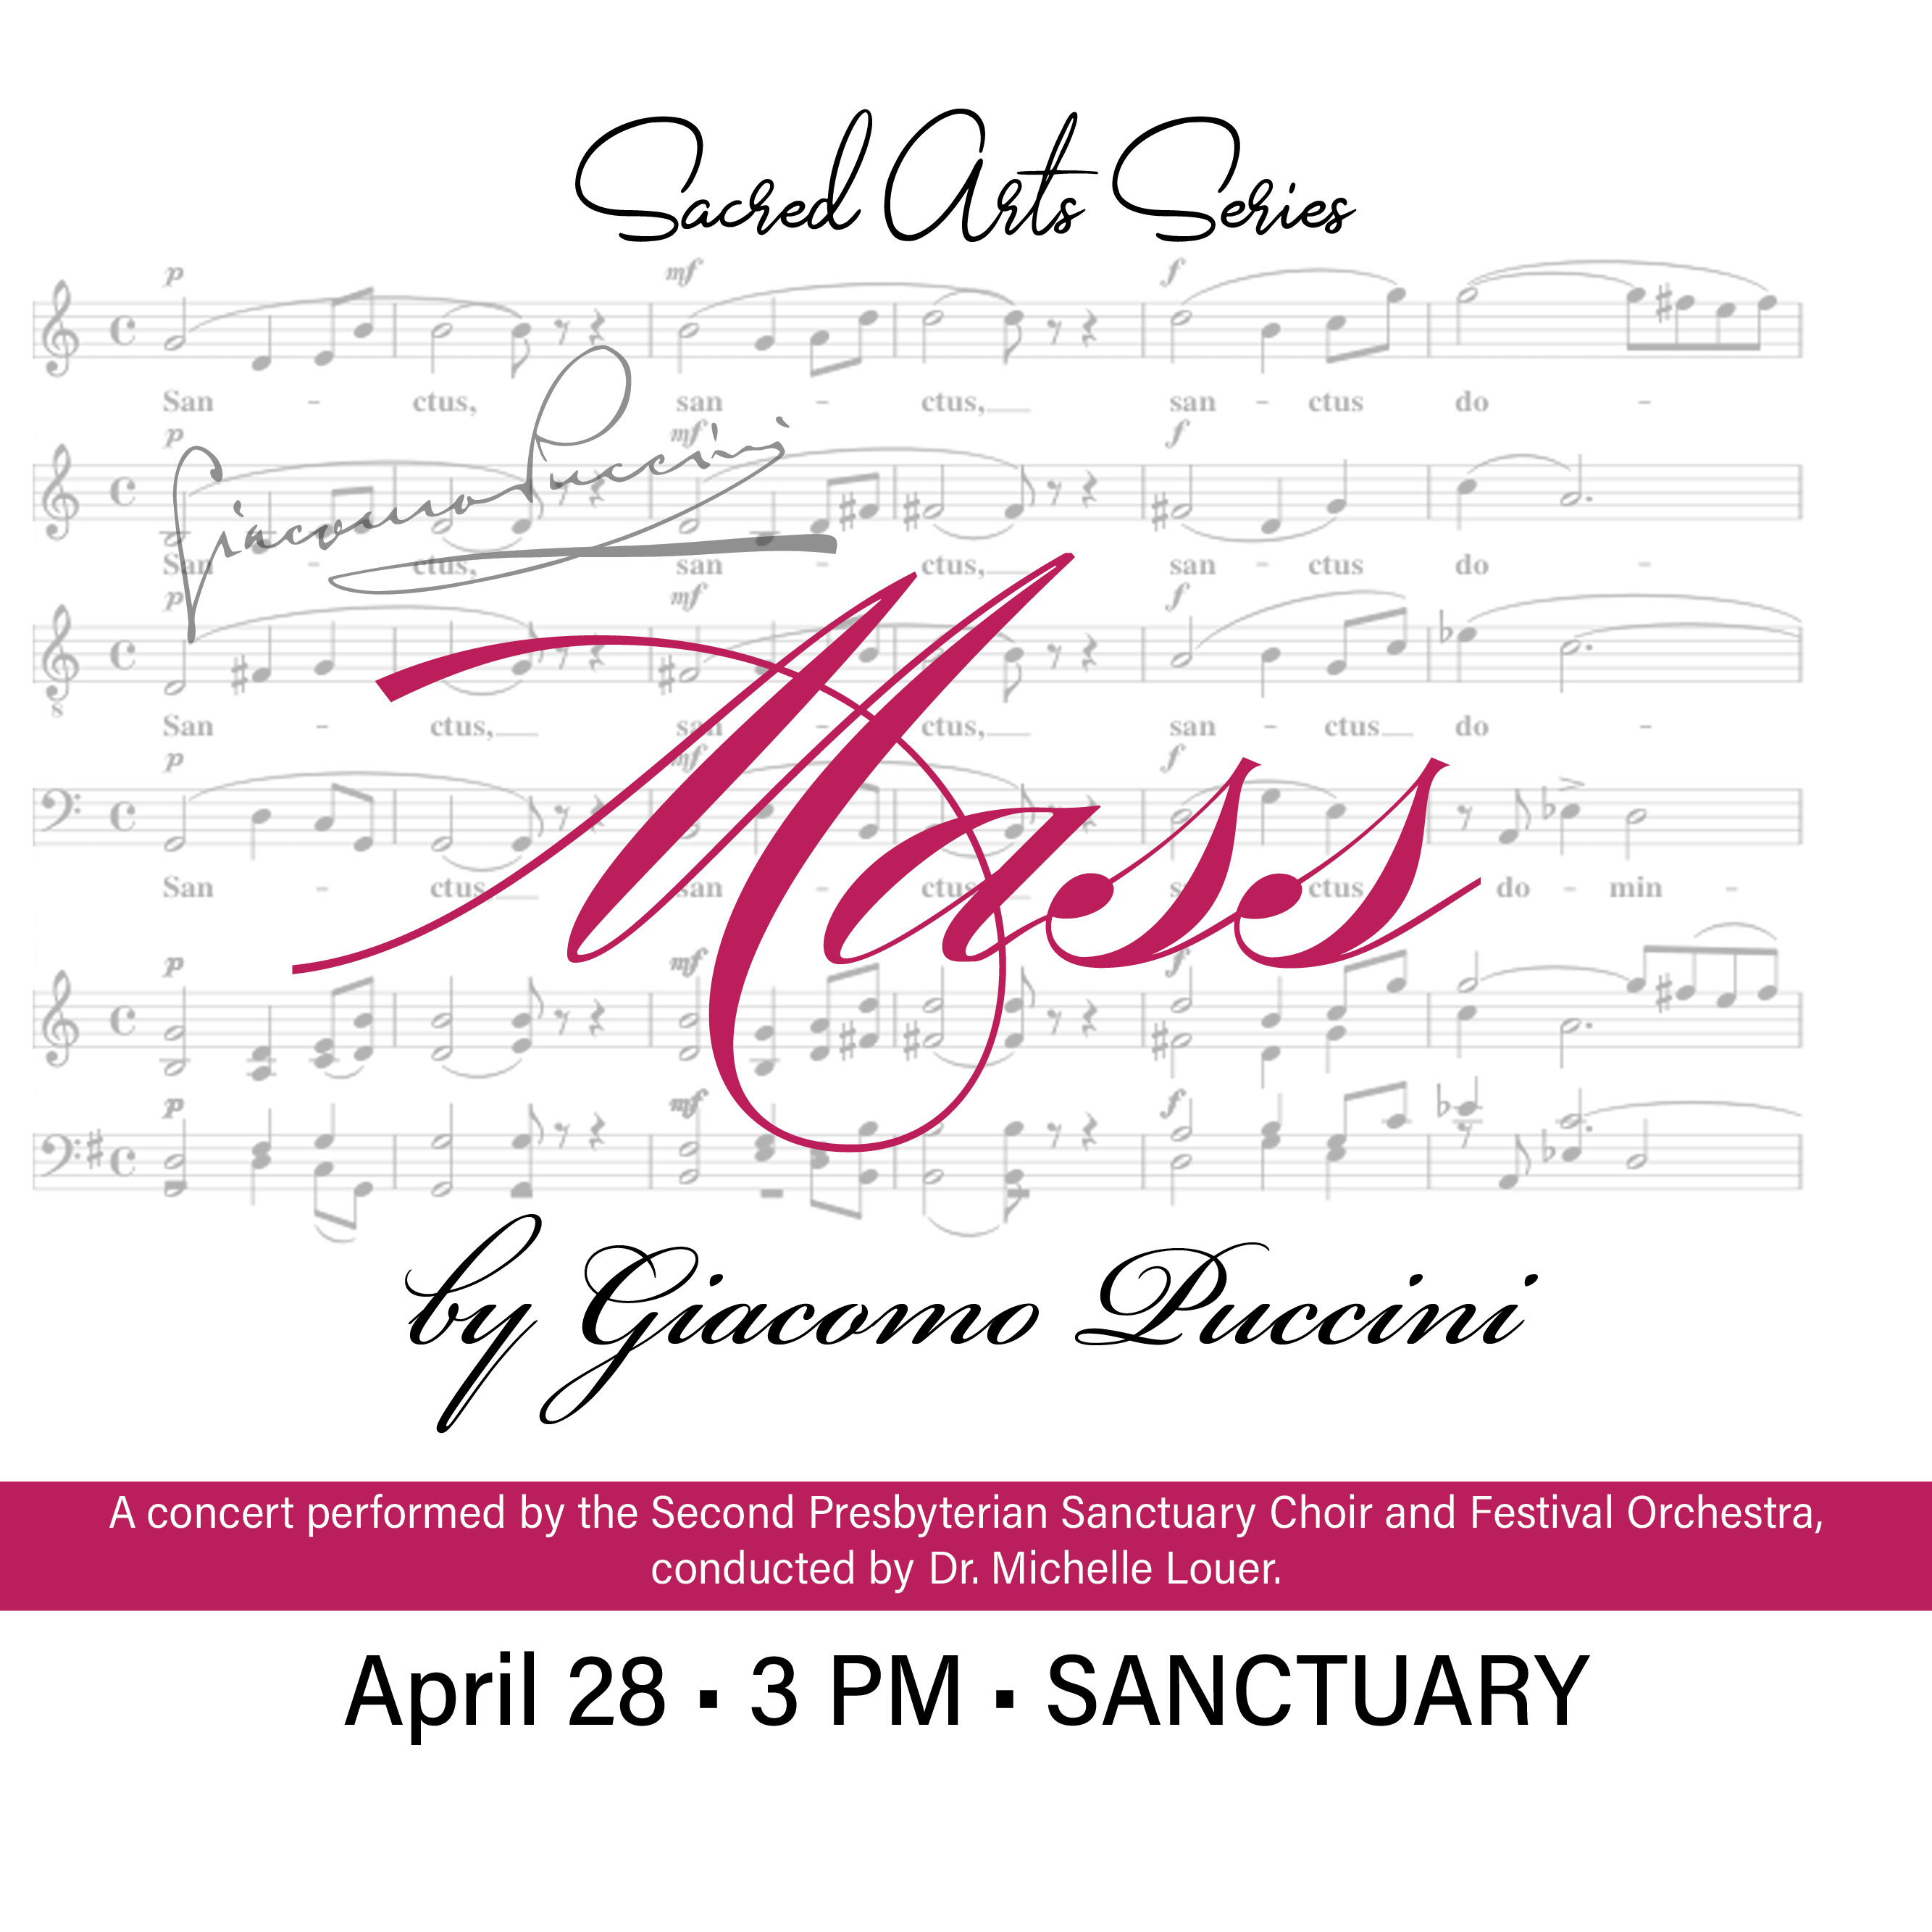 April 28
A concert performed by the Second Presbyterian Sanctuary Choir and Festival Orchestra, conducted by Dr. Michelle Louer.
